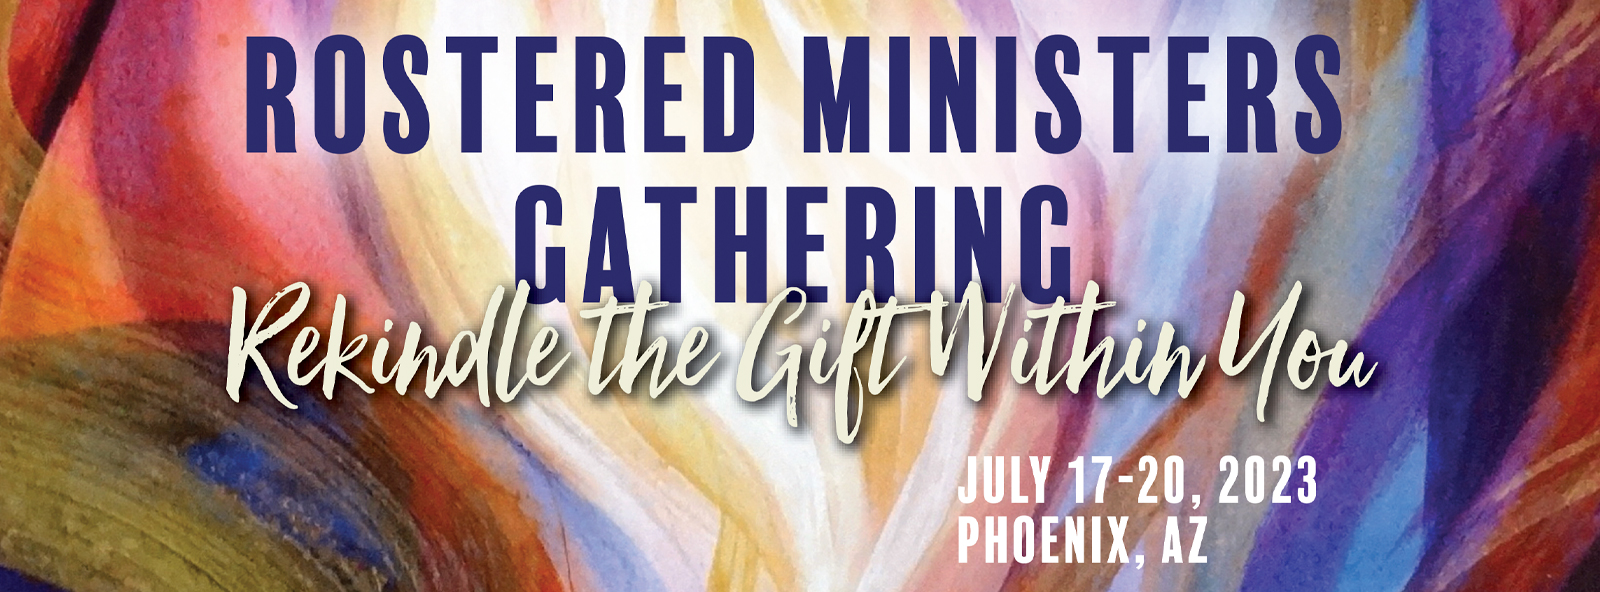 Rekindle the Gift Within You - Rostered Ministers Gathering